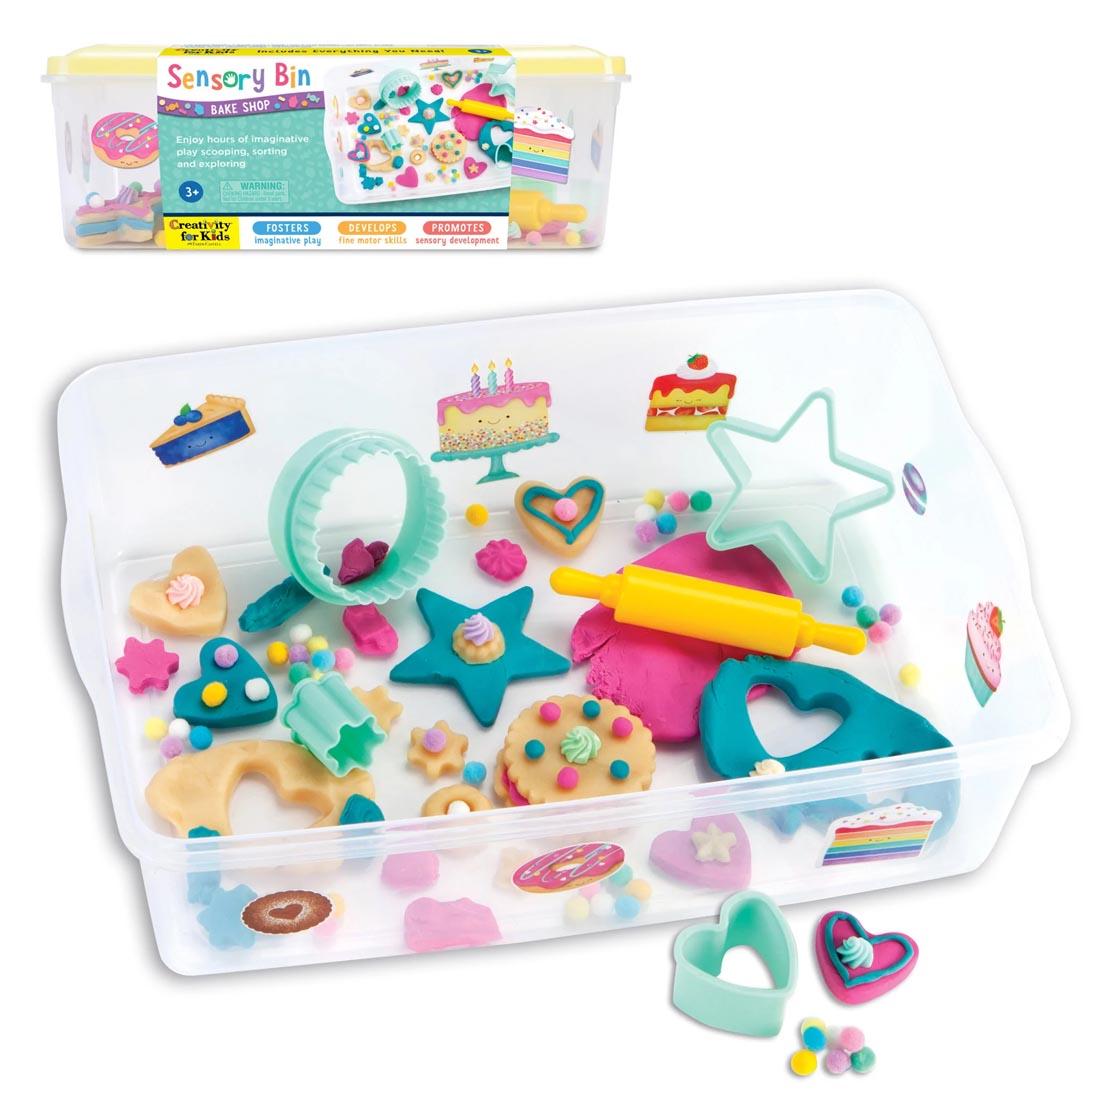 Bake Shop Sensory Bin By Creativity For Kids shown both in package and open with clay creations made